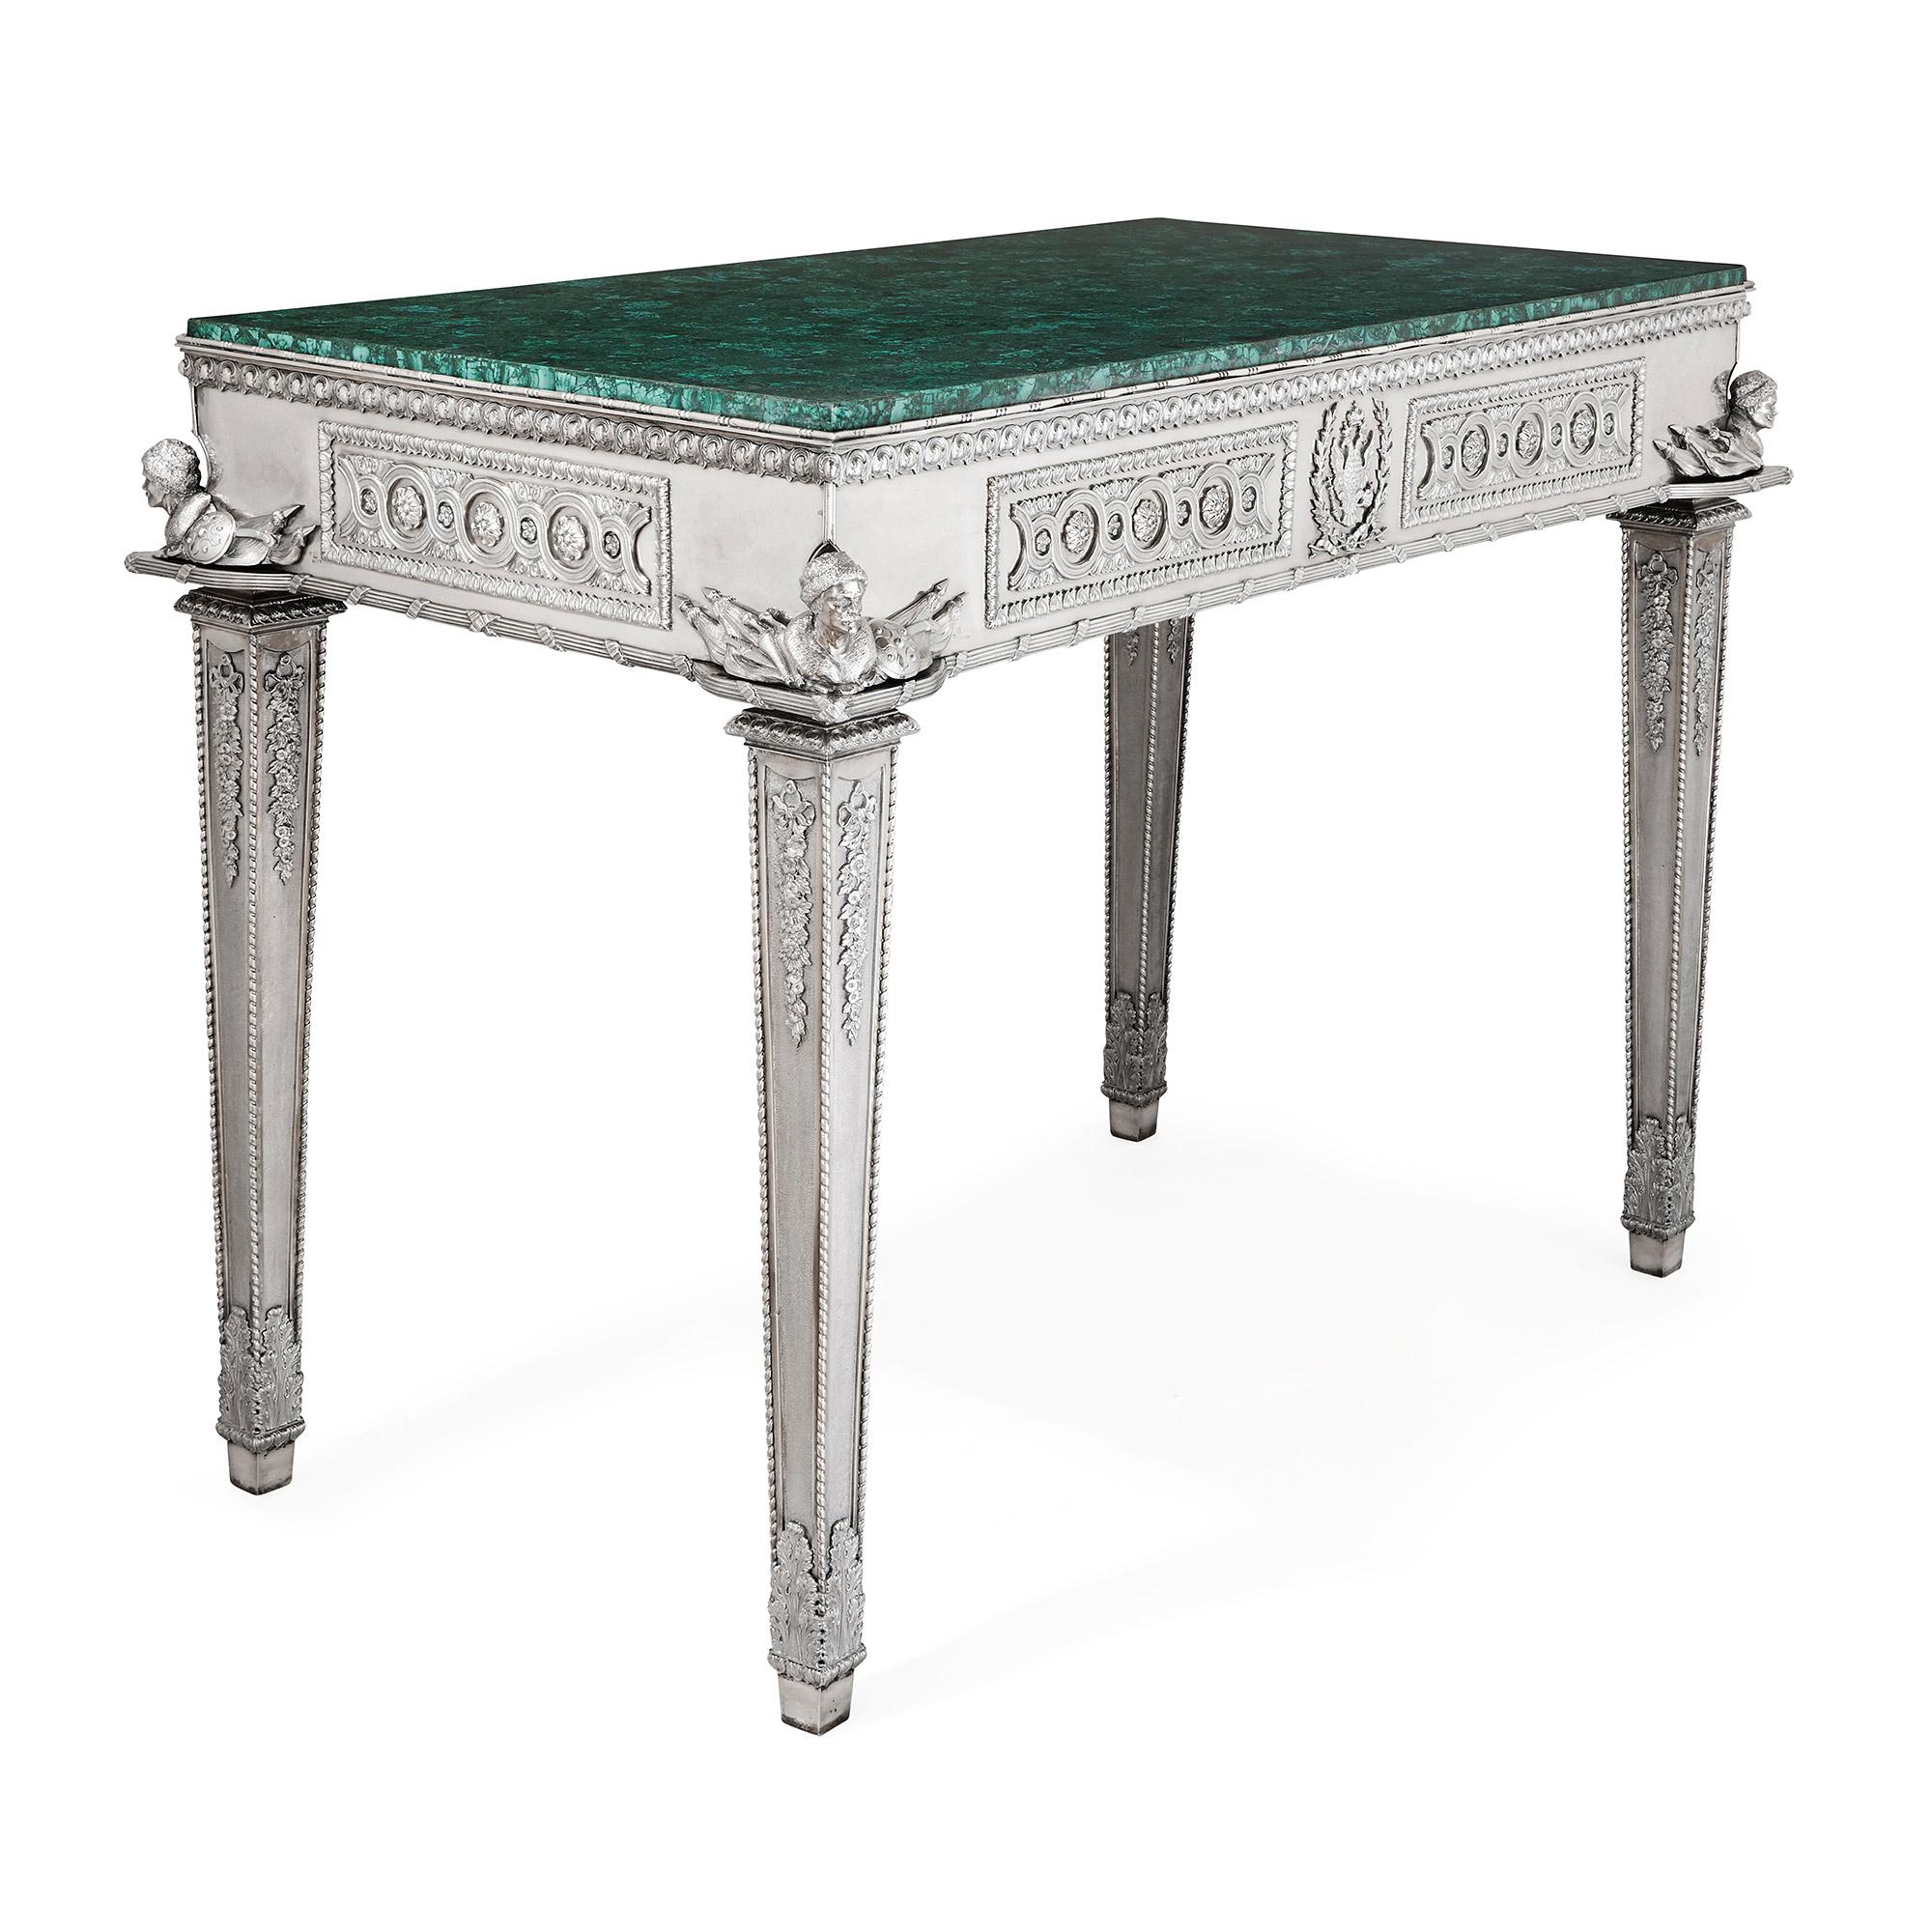 Russian malachite and silver table by Imperial silversmiths the Grachev Brothers
Russian, 1884
Measures: Height 85cm, width 113cm, depth 63cm

This beautiful silver table was manufactured by the Grachev Brothers, who were important makers within